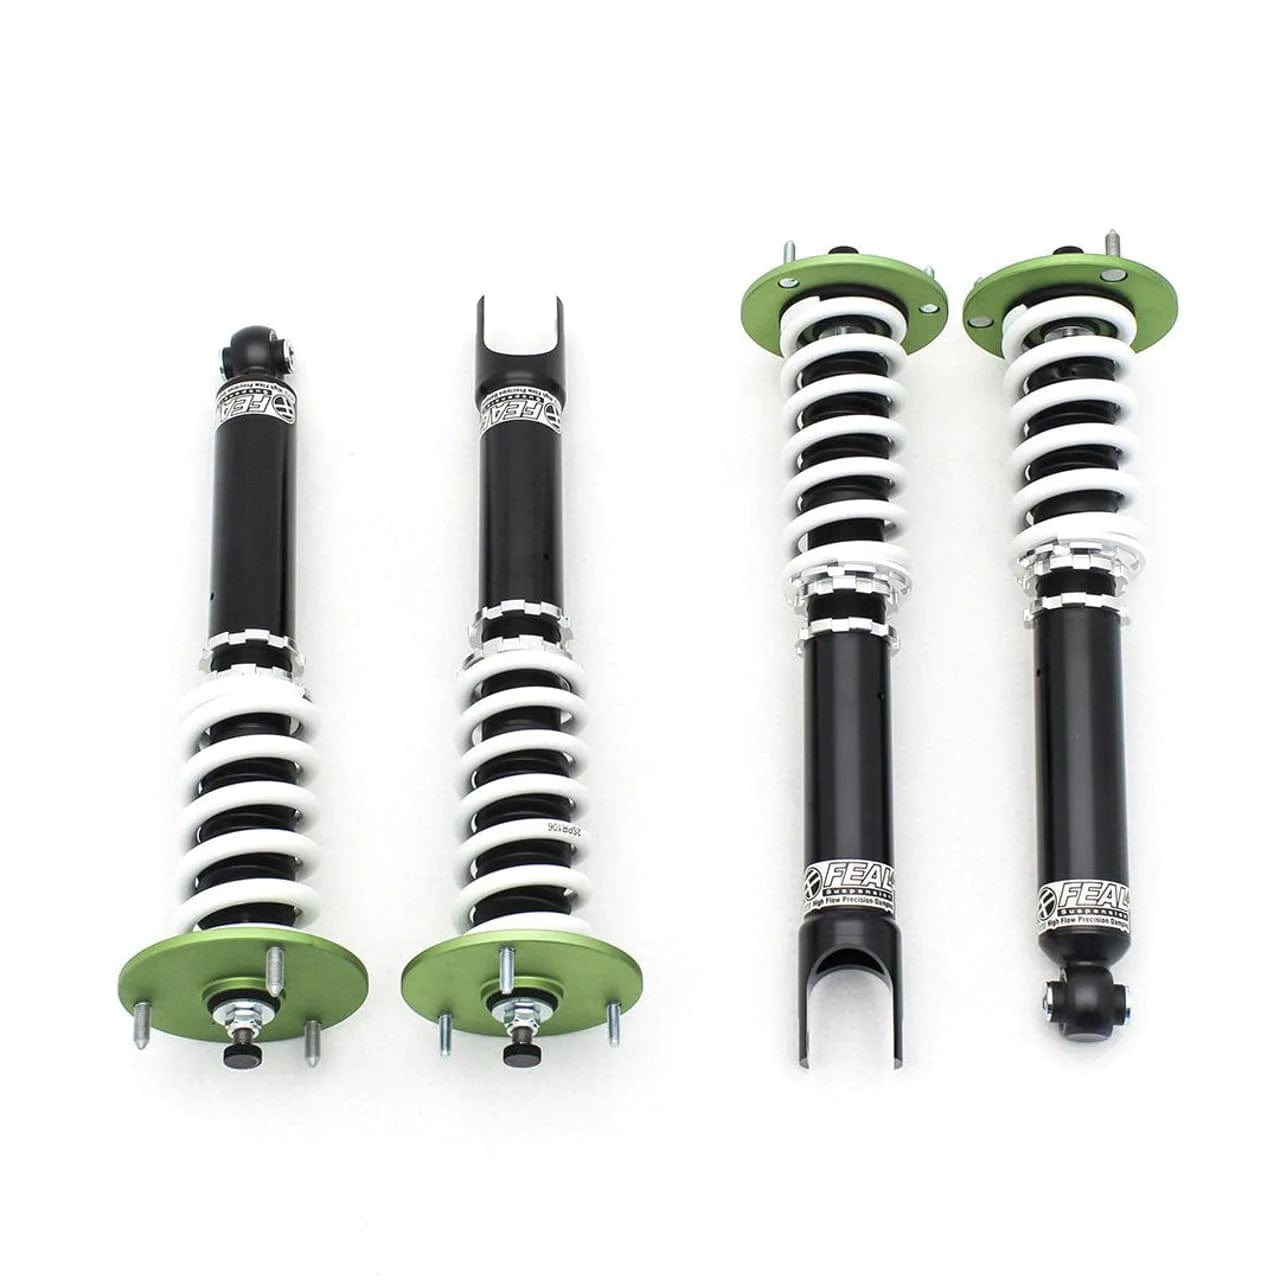 Feal 441 Pro Long Stroke Heavy Front Coilovers - 1995-1998 Nissan 240SX (S14) 441NI-02LH